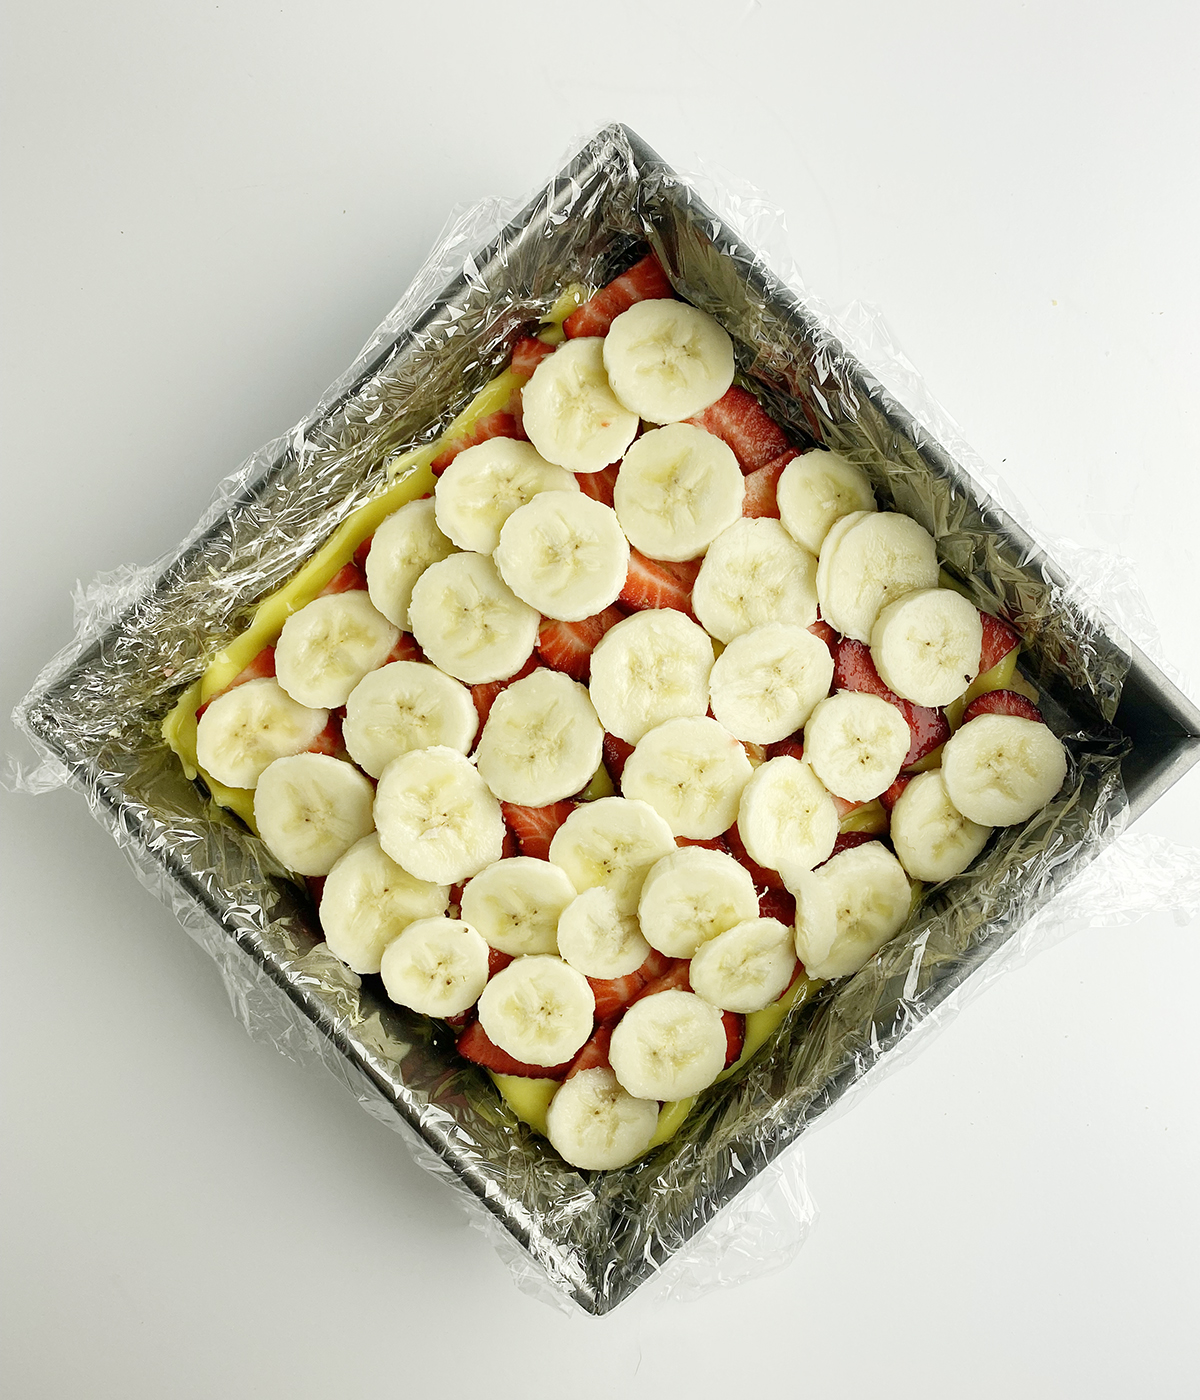 Strawberries and bananas and pudding layer of an icebox cake.